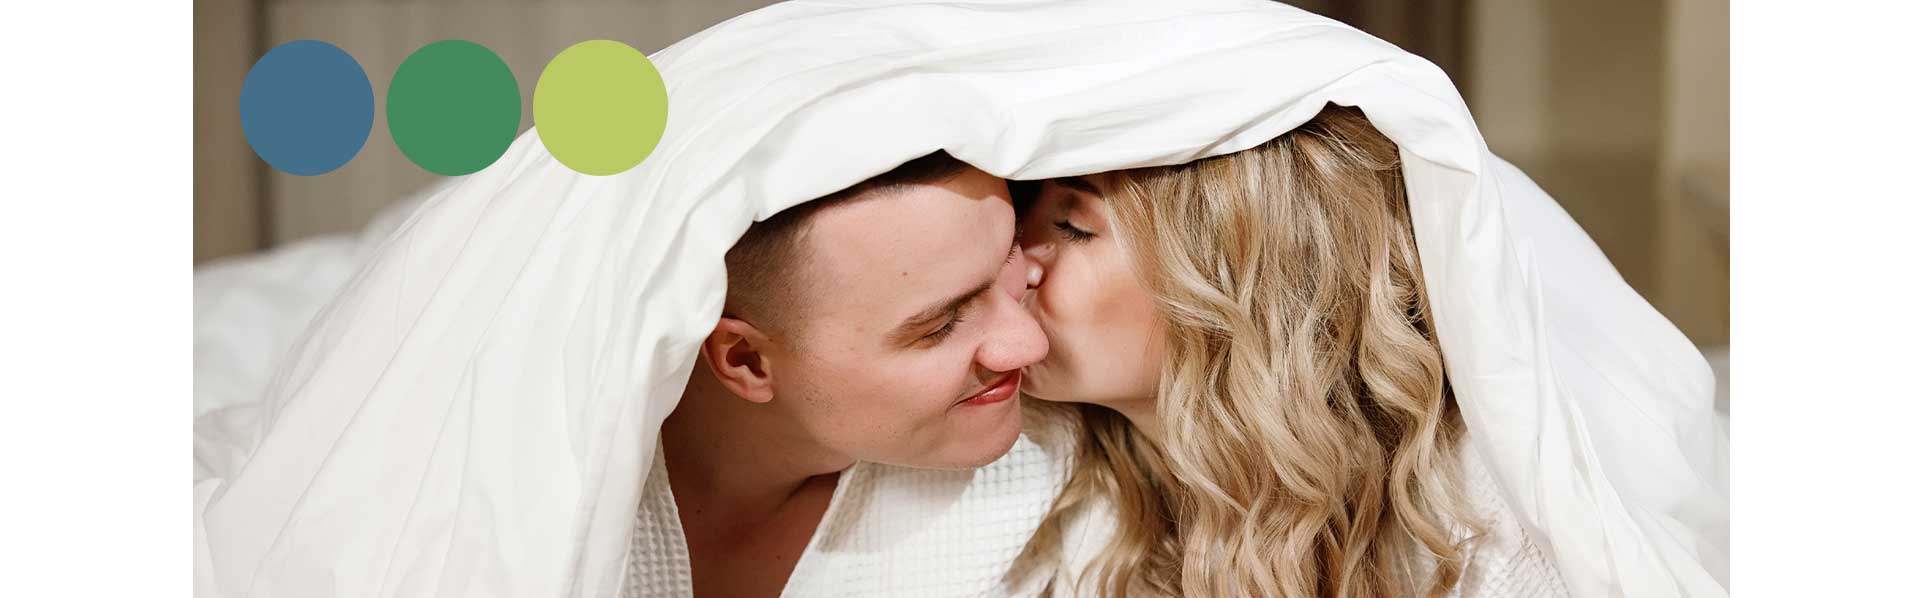 Couple in love kissing under duvet with three duvets logo.